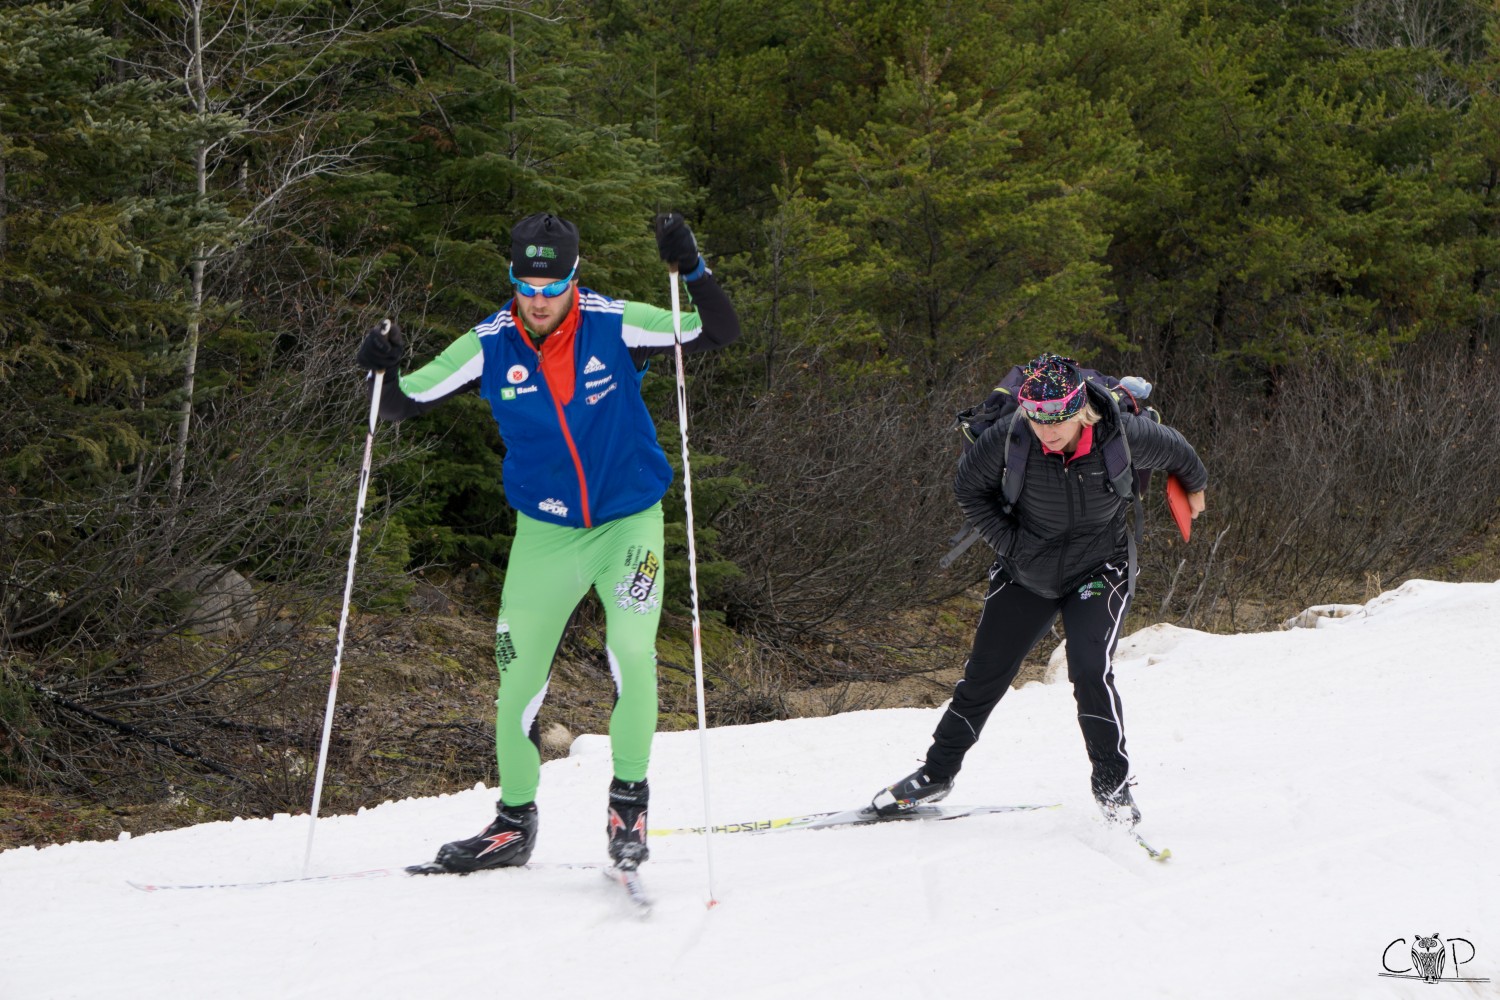 Pepa Miloucheva skates behind CGRP biathlete Casey Smith while at a training camp at La Forêt Montmorency in Quebec. (Photo: Caitlin Patterson)